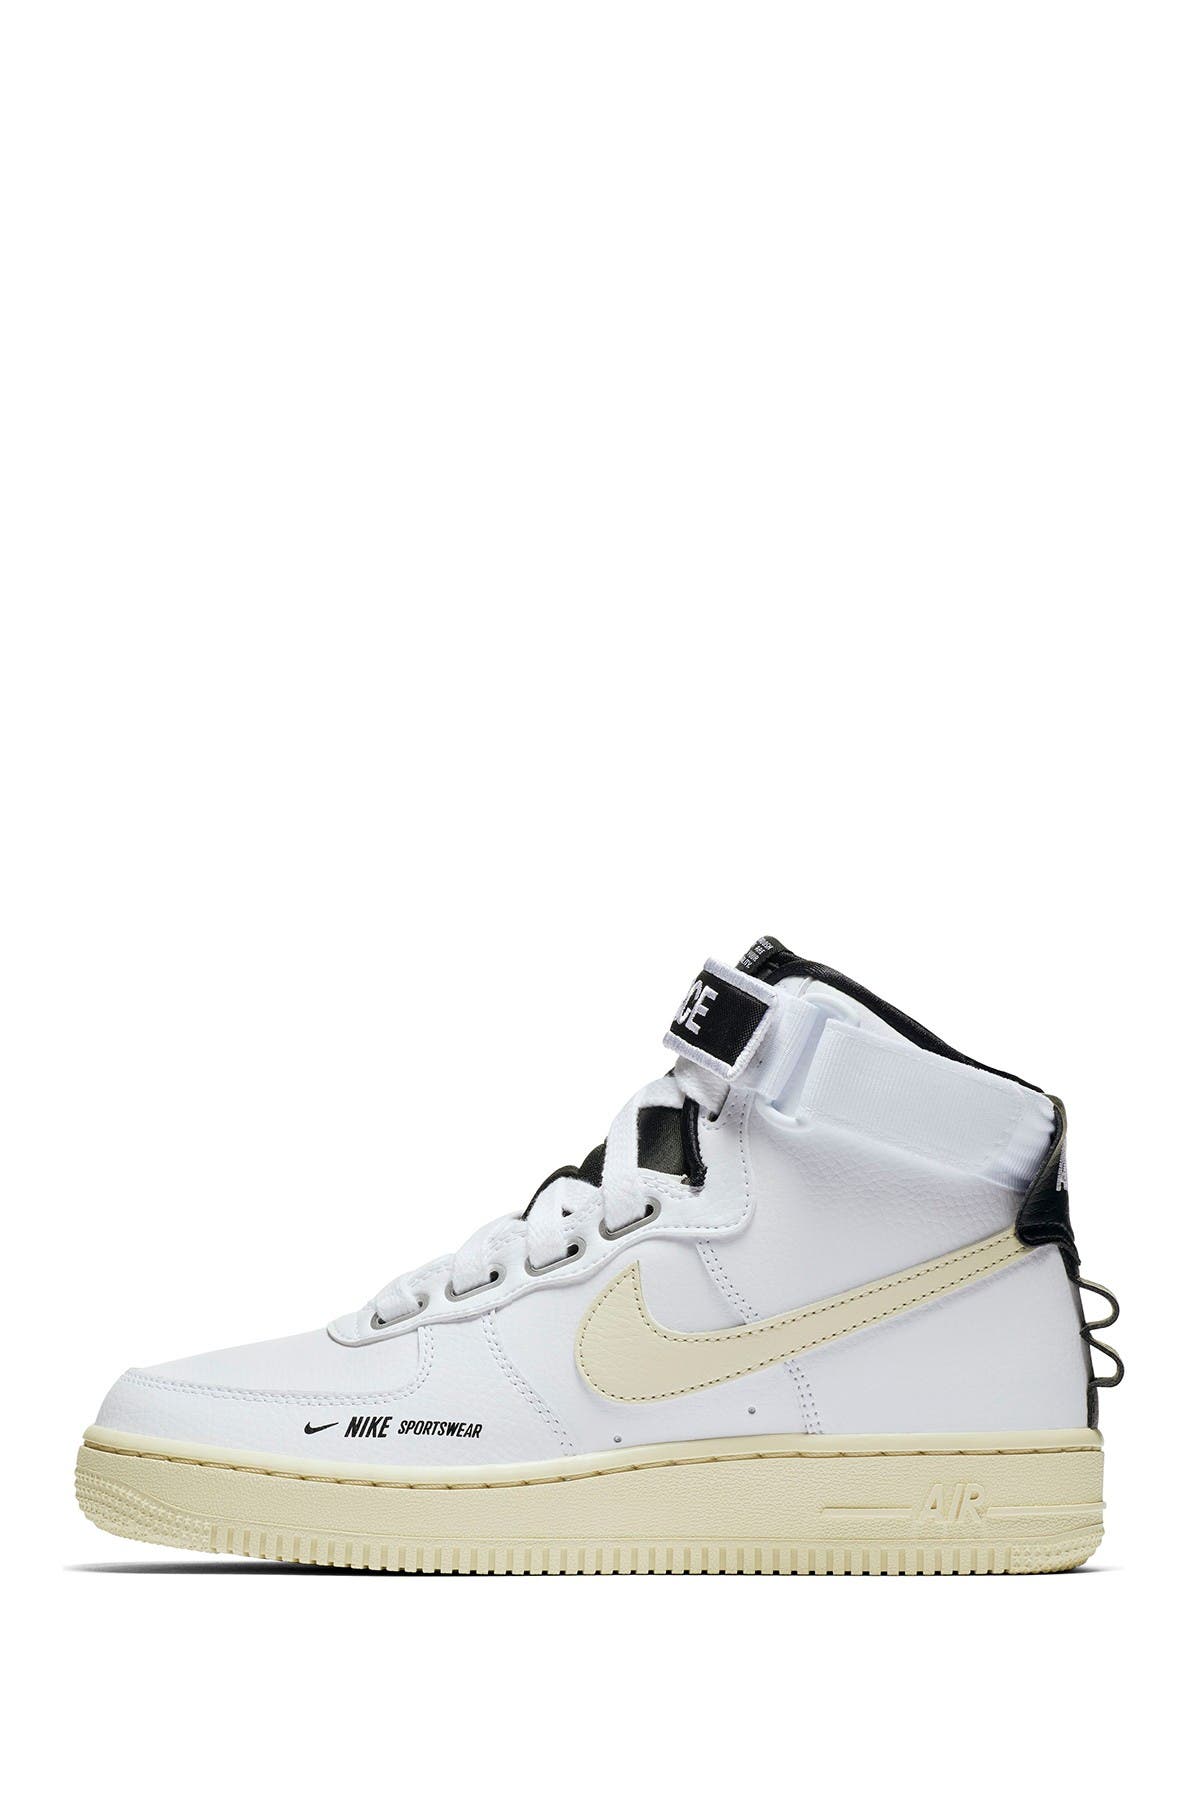 nike air force one utility women's